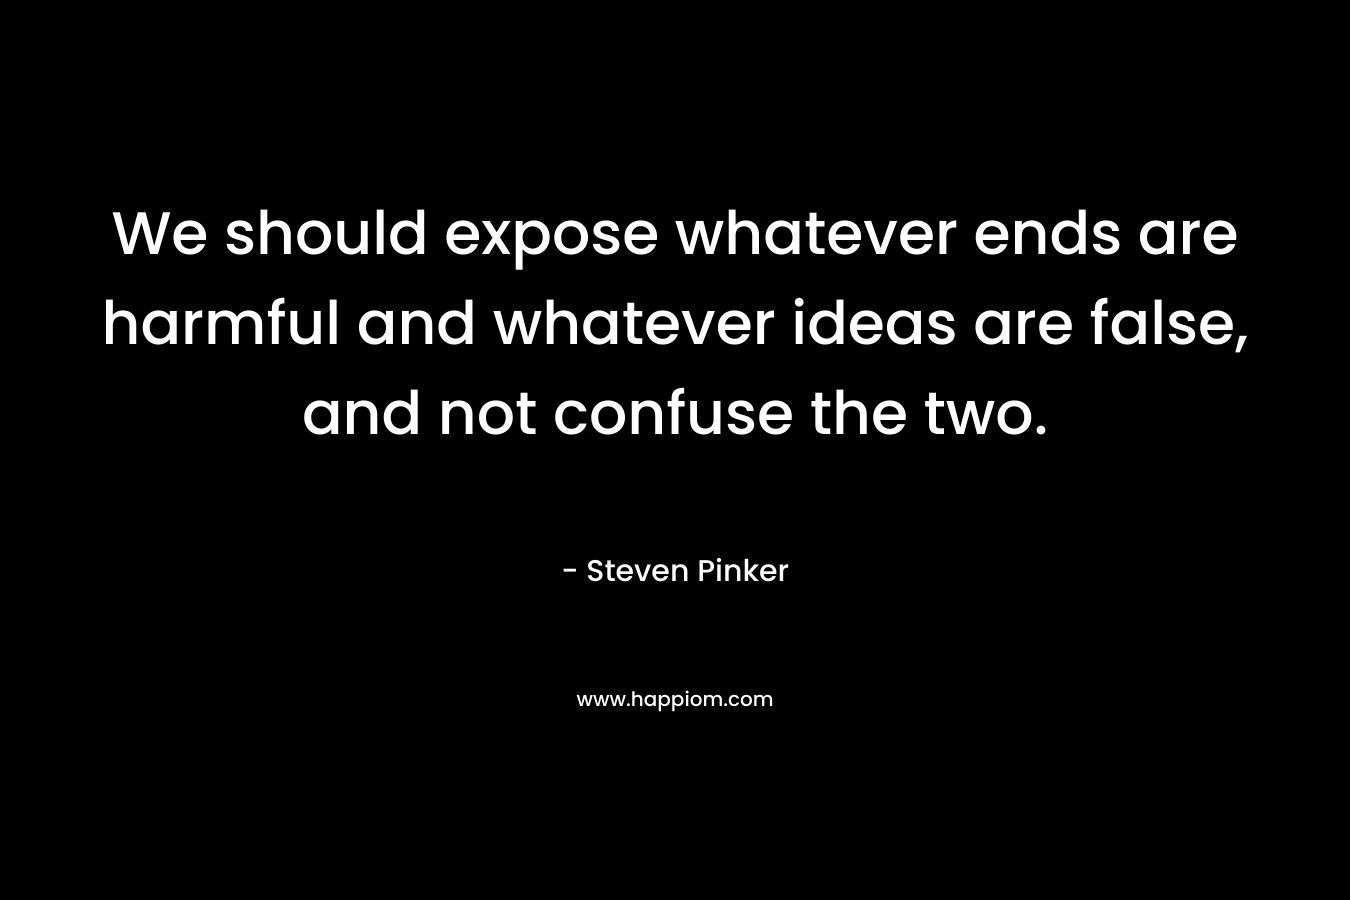 We should expose whatever ends are harmful and whatever ideas are false, and not confuse the two.